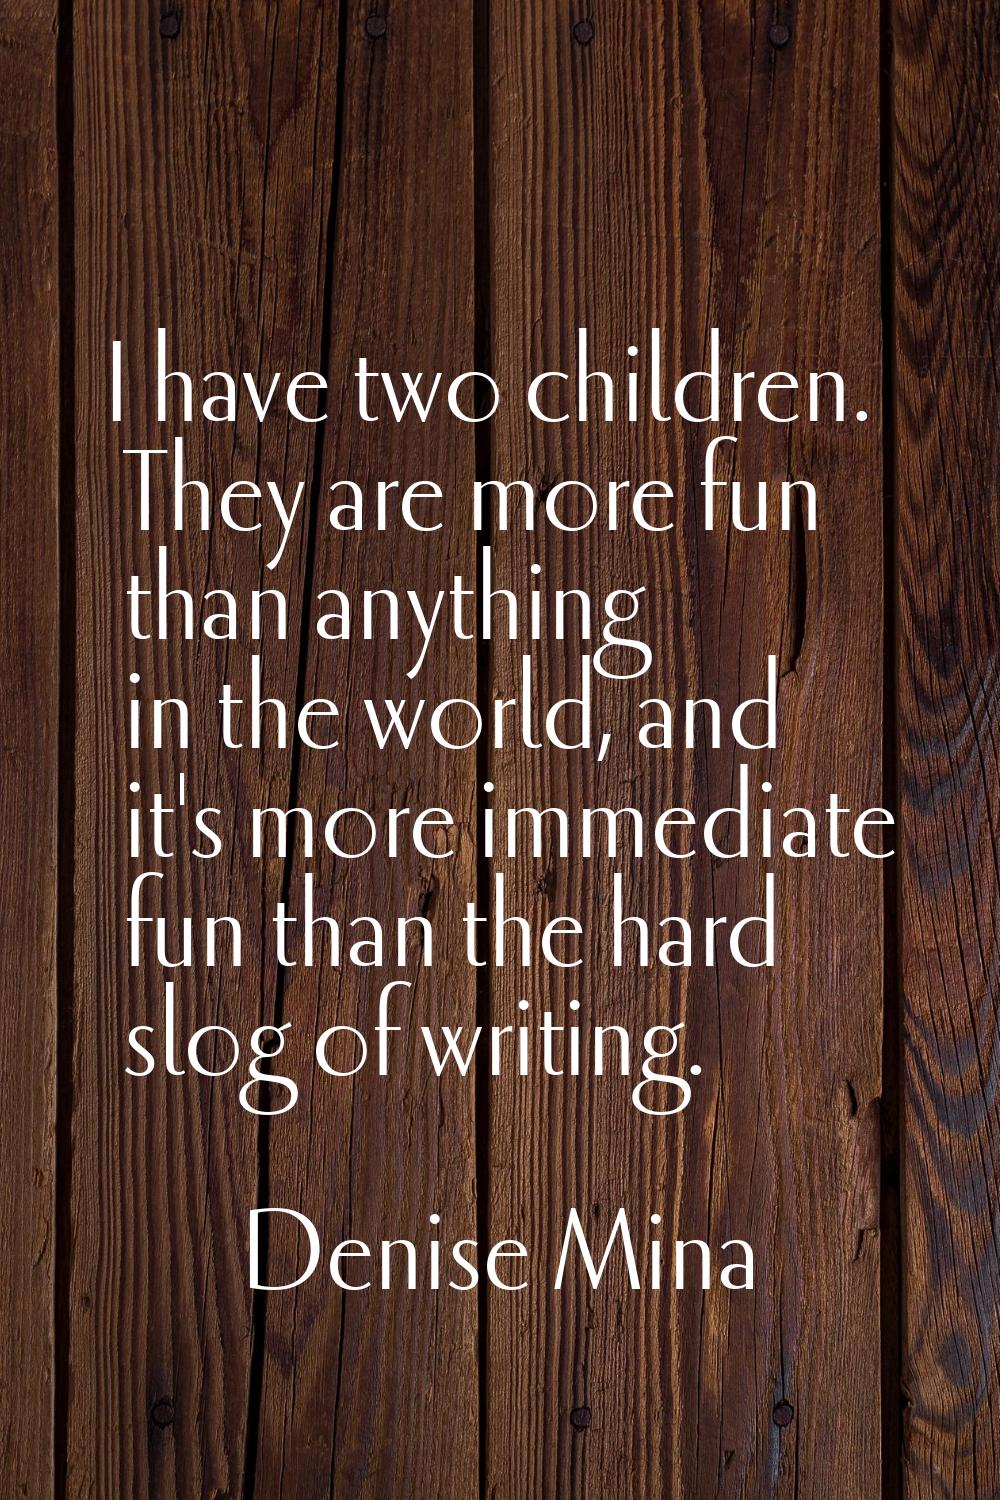 I have two children. They are more fun than anything in the world, and it's more immediate fun than